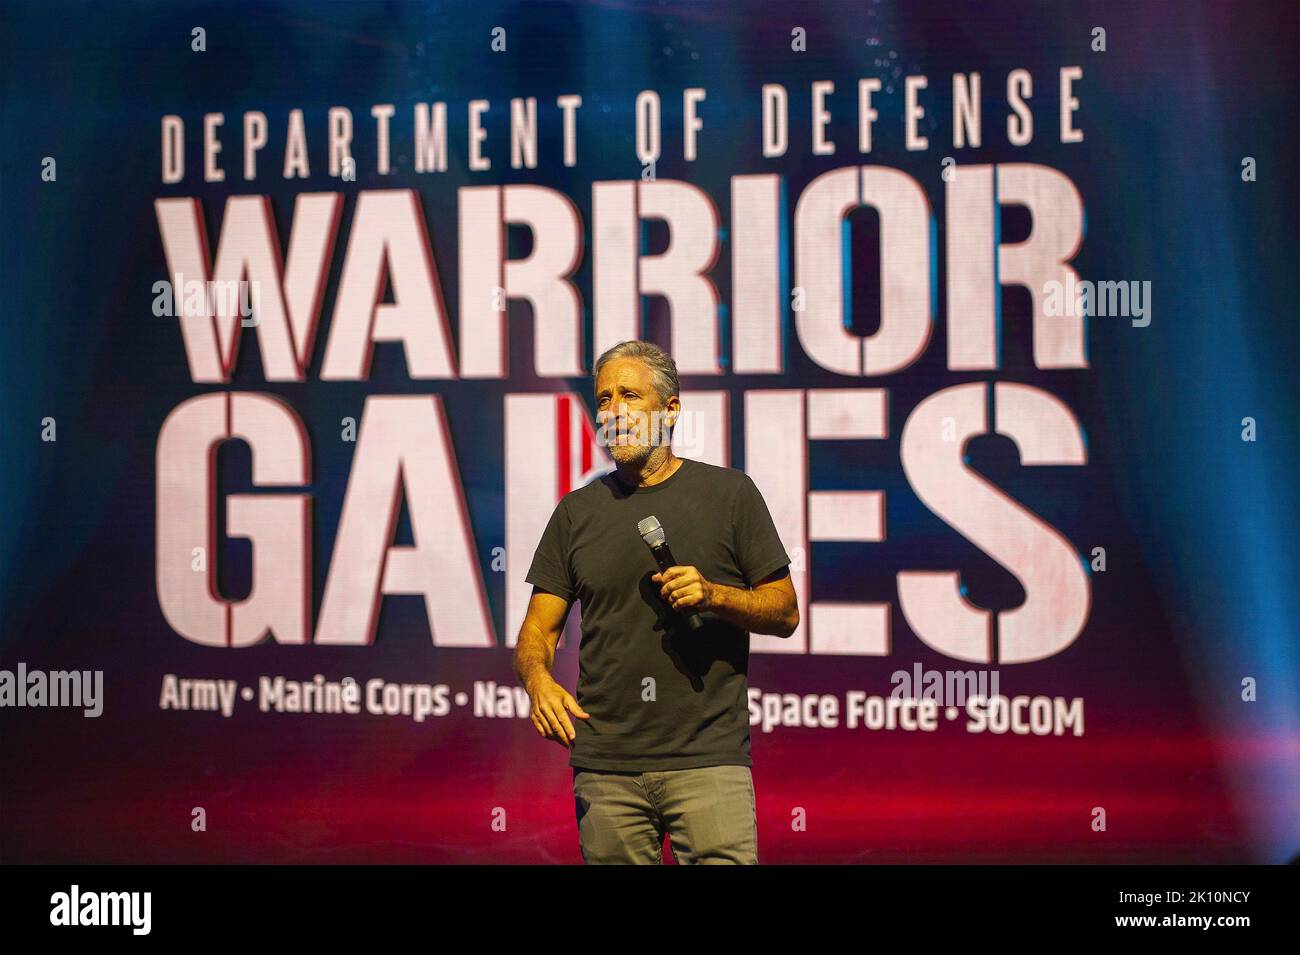 Orlando, United States of America. 19 August, 2022. Comedian and military activist Jon Stewart hosts the 2022 Department of Defense Warrior Games opening ceremony at Walt Disney World Resort, August 19, 2022 in Orlando, Florida.  Credit: Sgt. Henry Villarama/DOD Photo/Alamy Live News Stock Photo